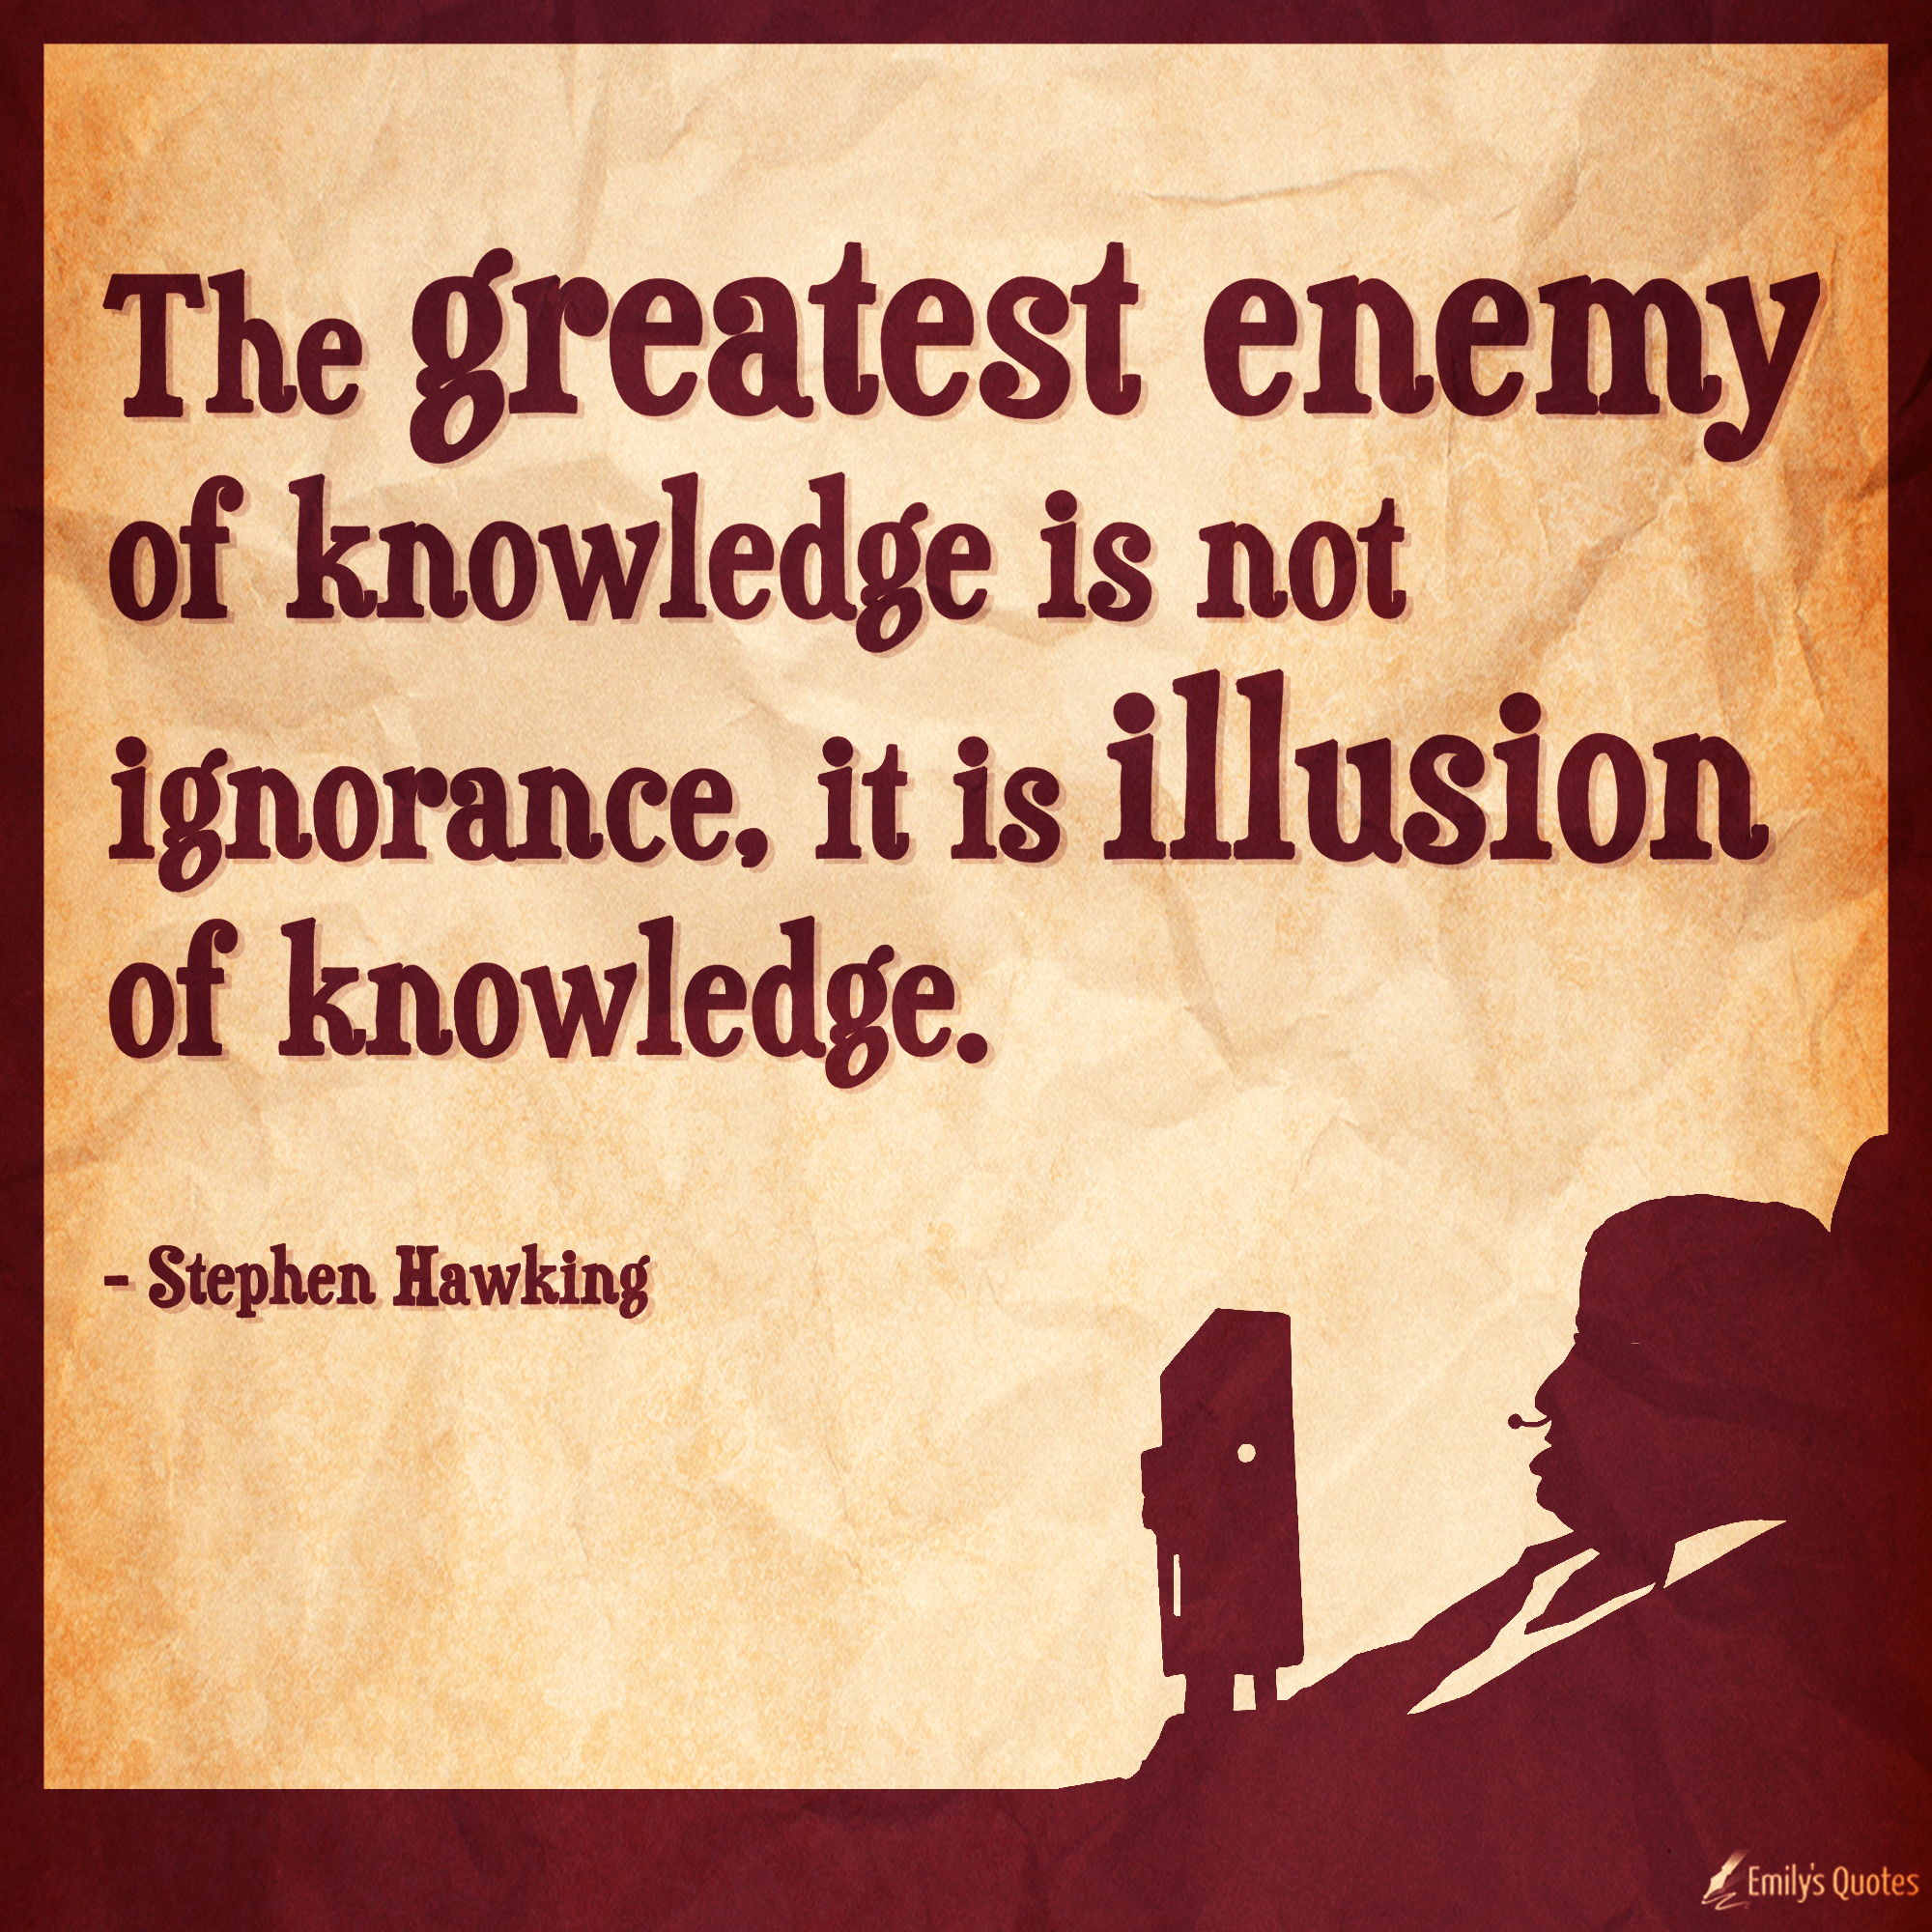 The greatest enemy of knowledge is not ignorance, it is illusion of knowledge